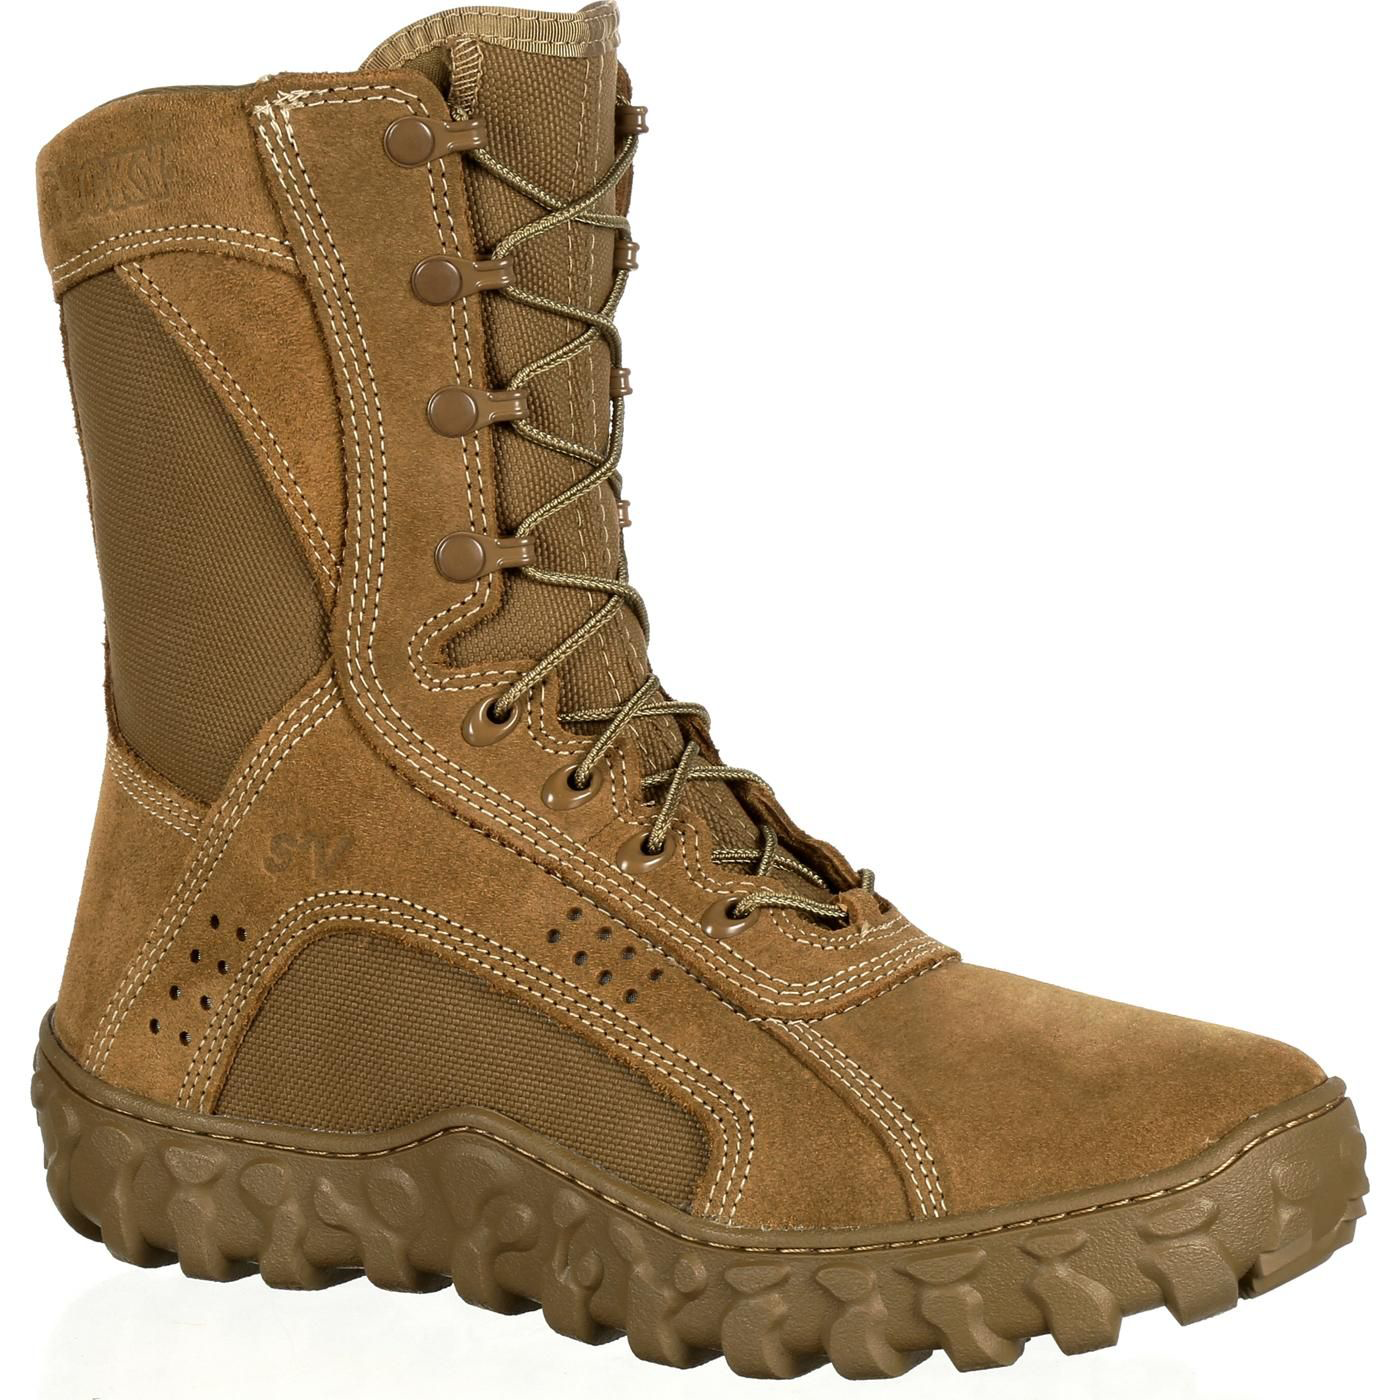 Rocky S2V Tactical Military Boots for Men - Coyote Brown - 5.5M